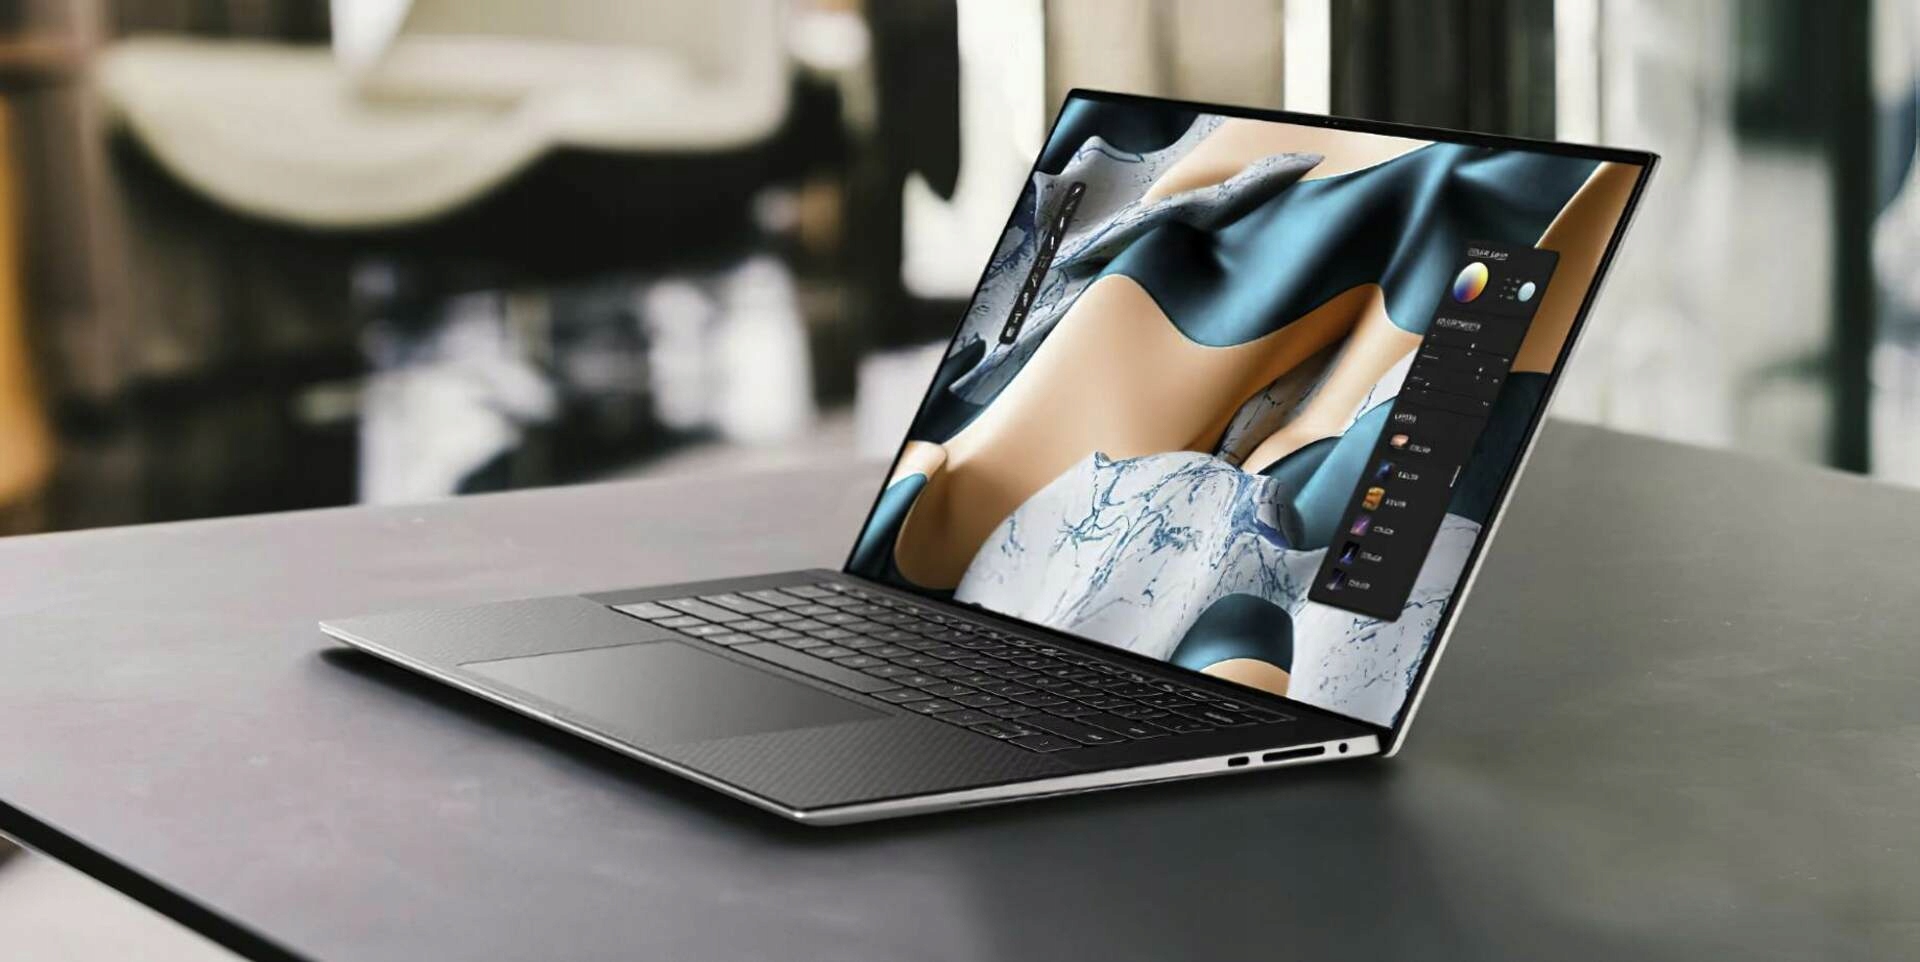 4K Content Creation: Edit 4K videos with Dell XPS.